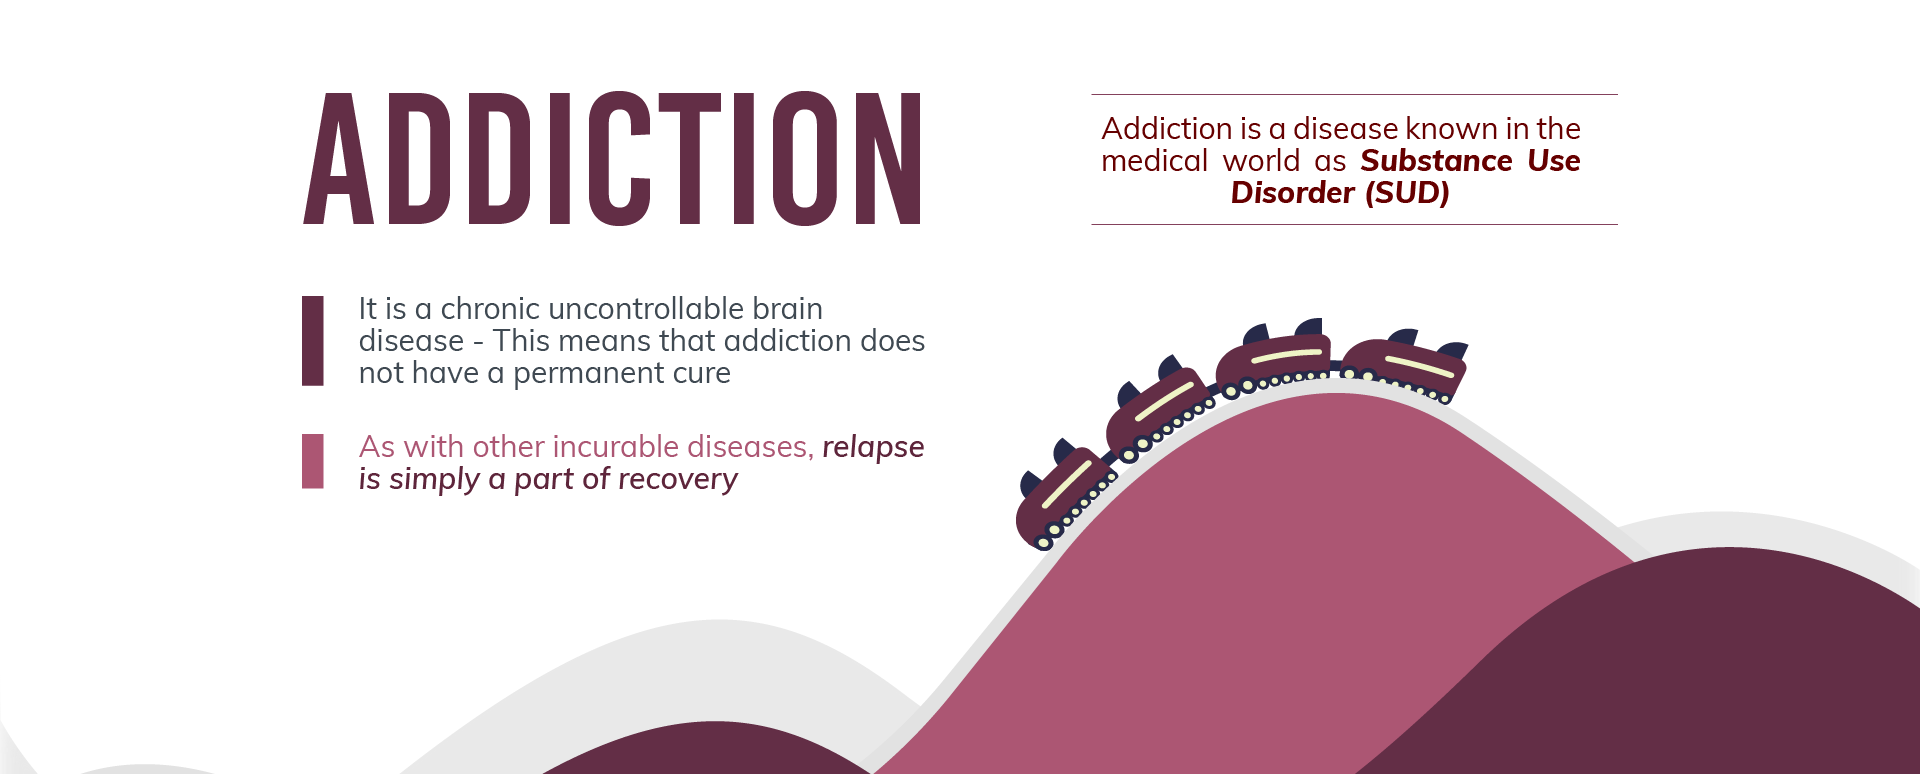 Addiction is a disease known in the medical world as "Substance Use Disorder (SUD)". It is a chronic uncontrollable brain disease, this meansthat addiction does not have a permanent cure. As with other incurable diseases, relapse is simply a part of recovery.